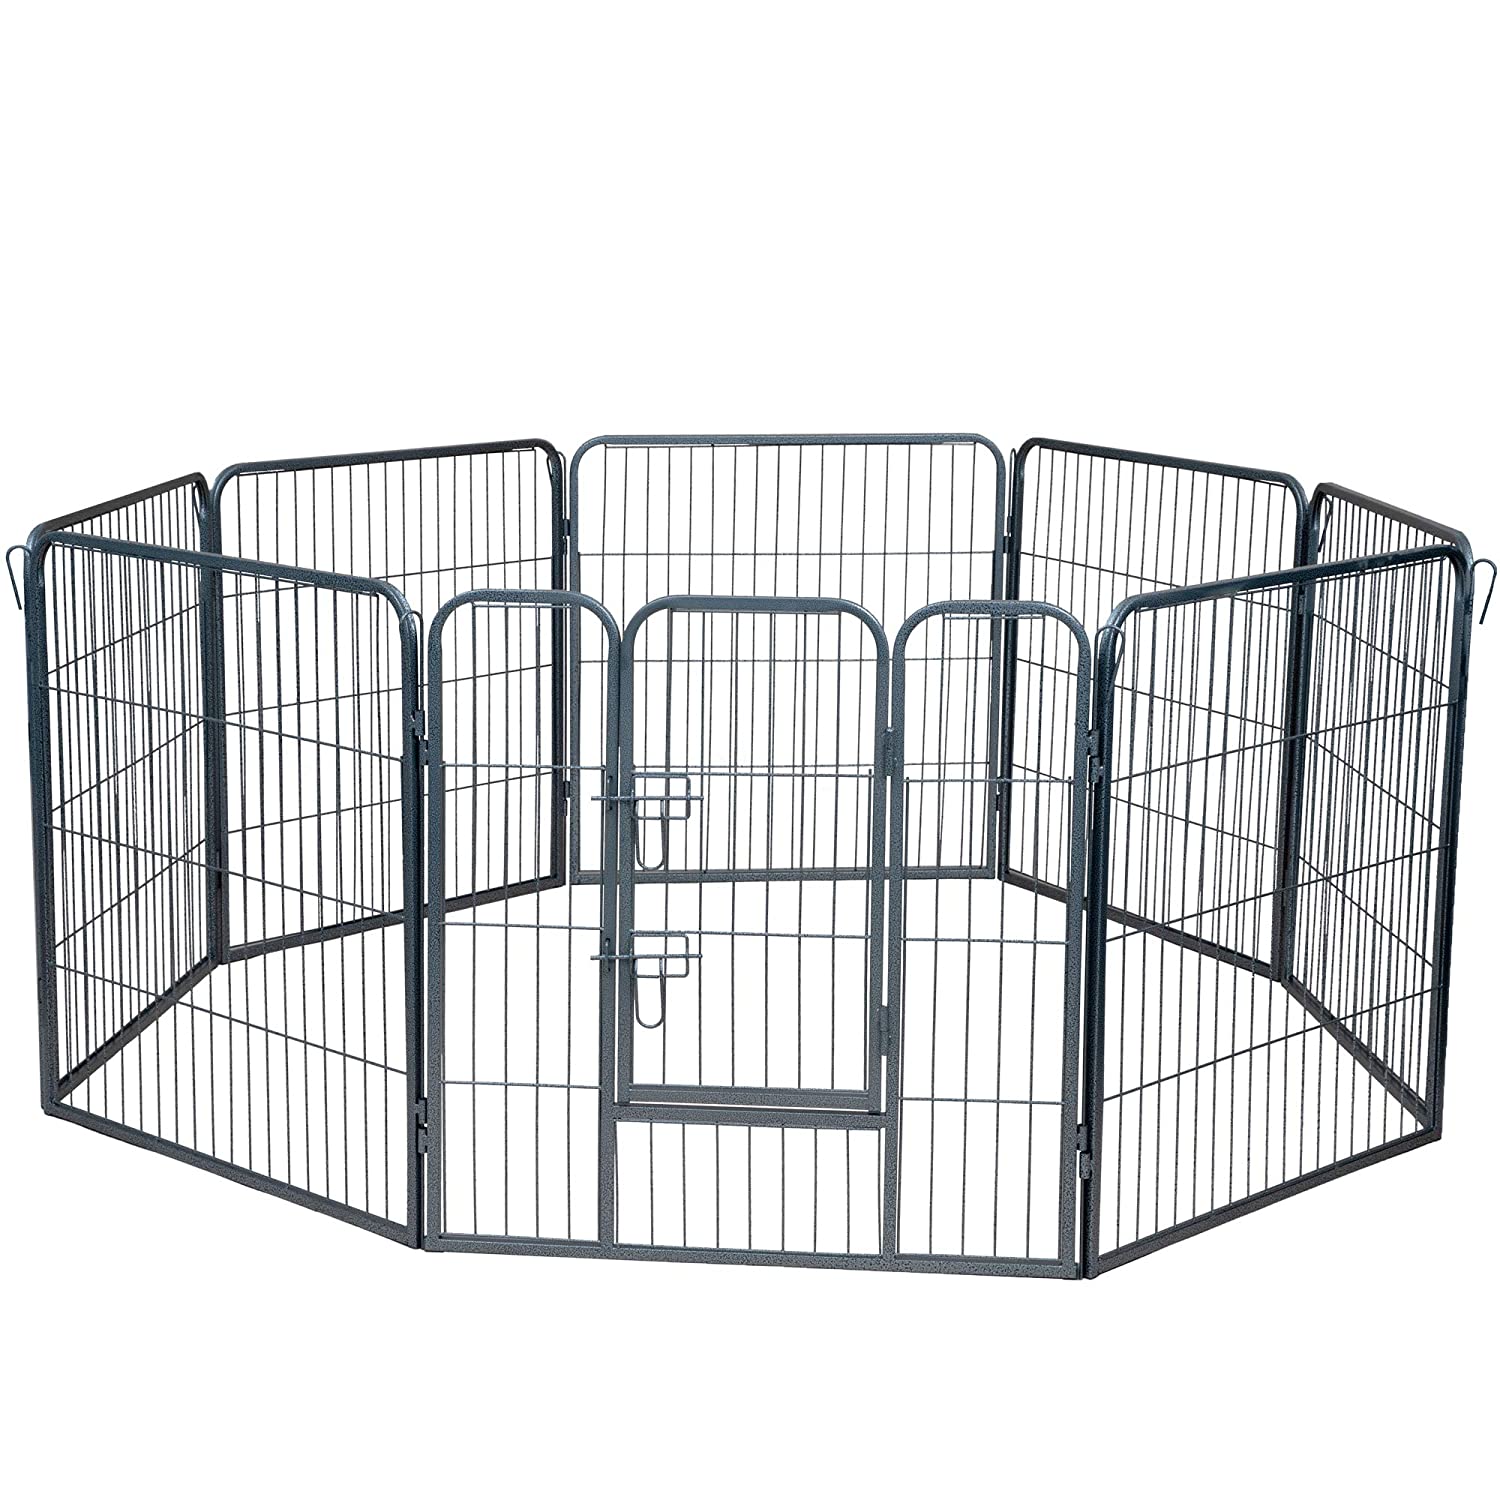 Paws and Pals Pet Exercise Pen Tube Gate